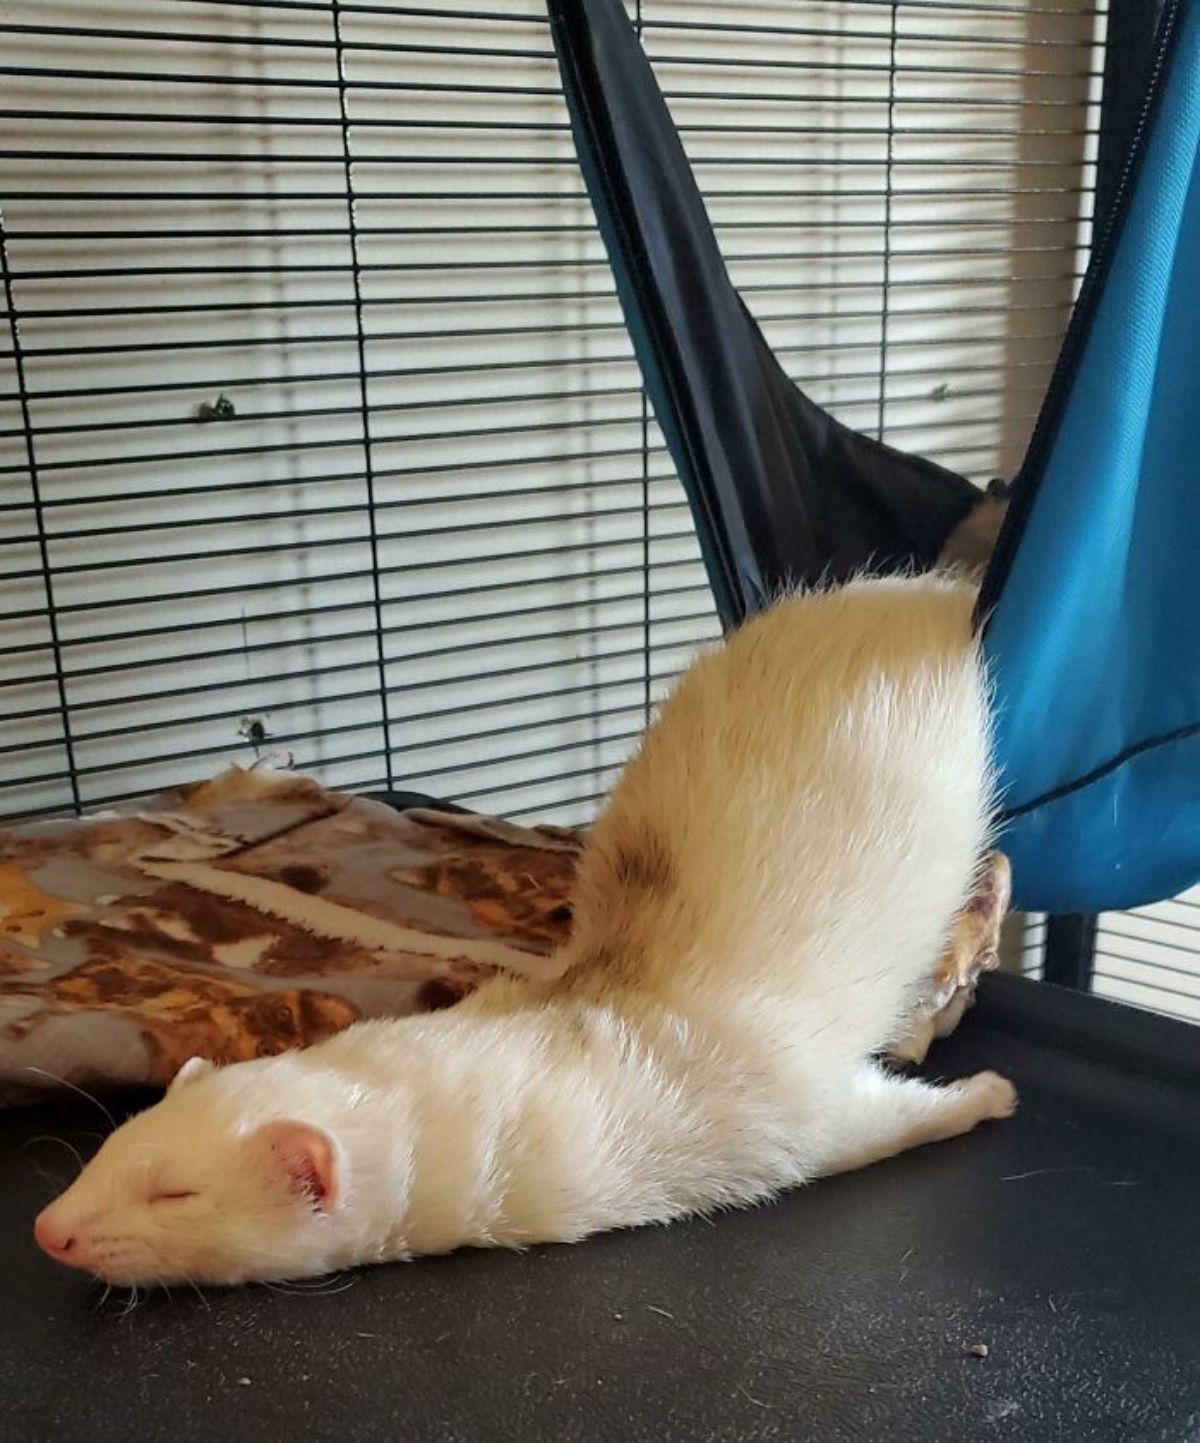 white ferret falling out of a blue hammock onto a black surface while sleeping with only the back inside the hammock